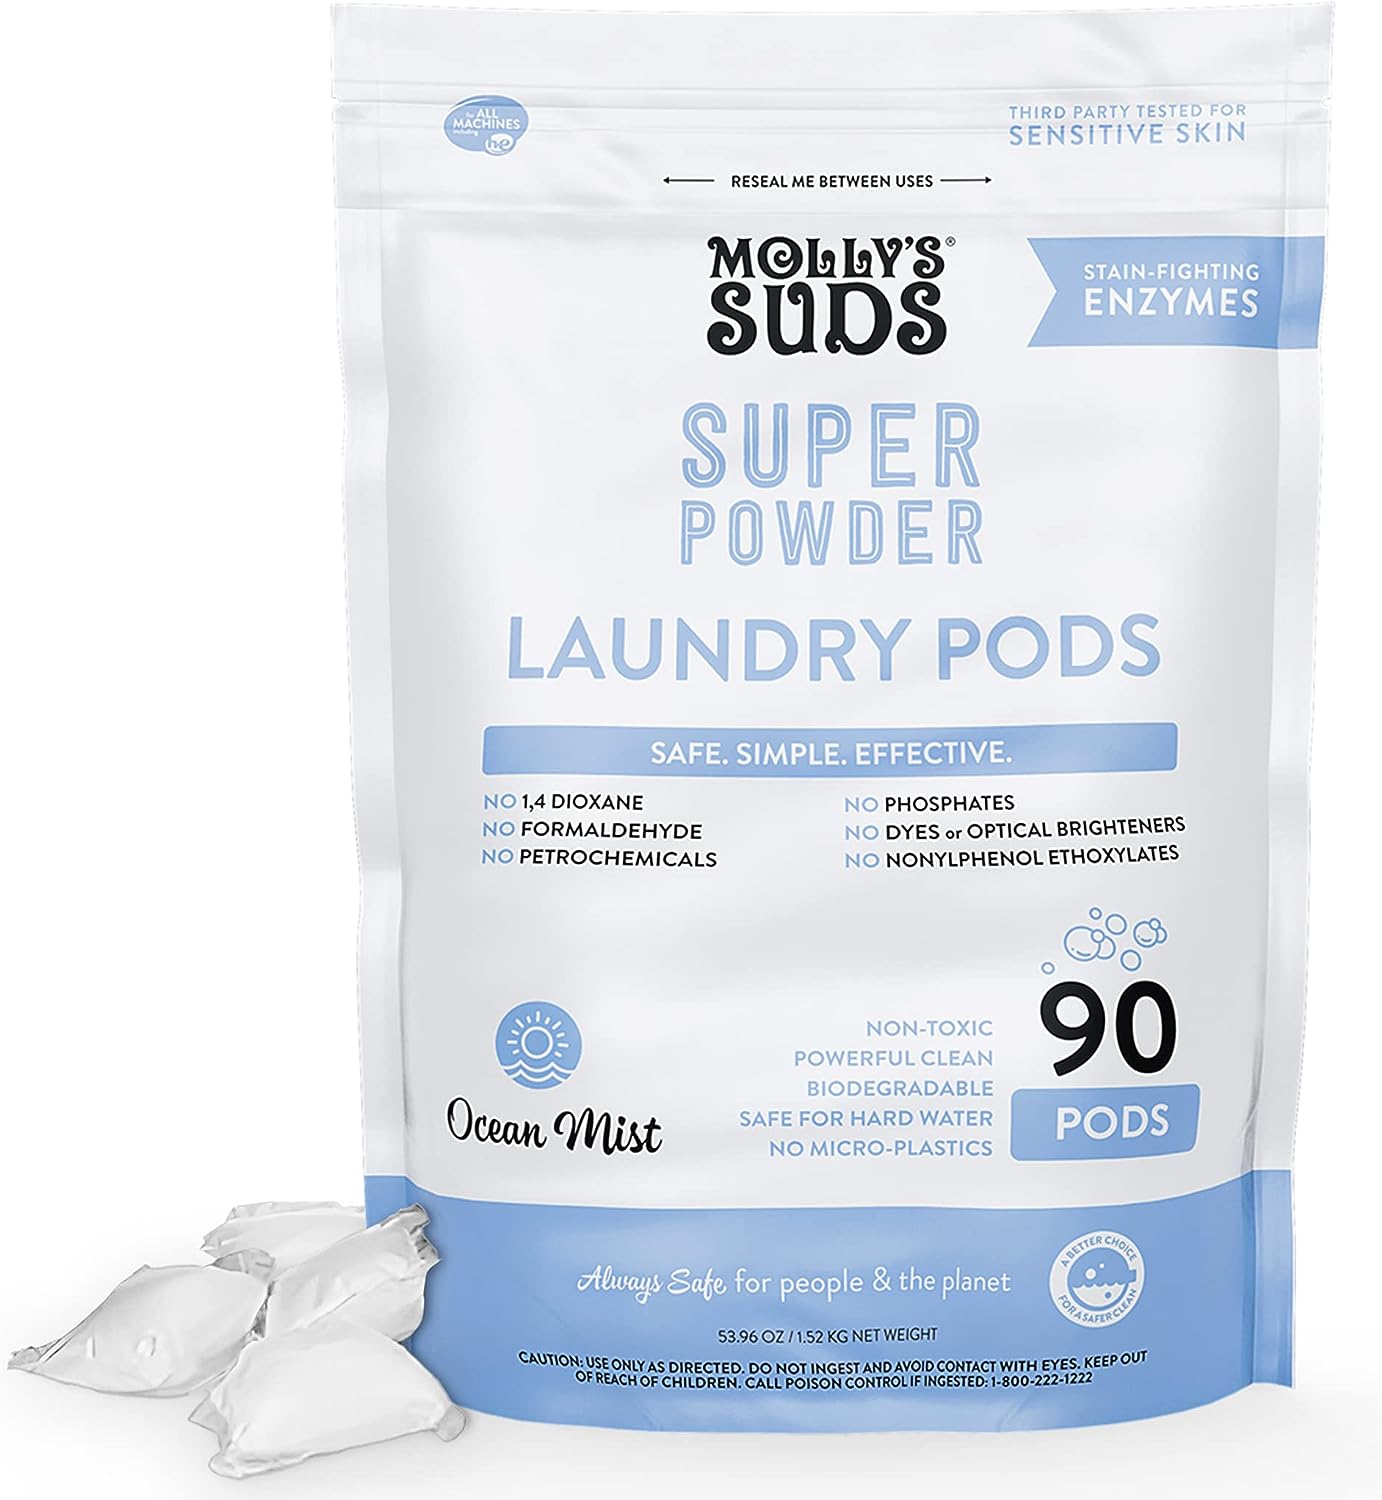 Molly's Suds Super Powder Laundry Detergent Pods, Natural Extra Strength  Deterg